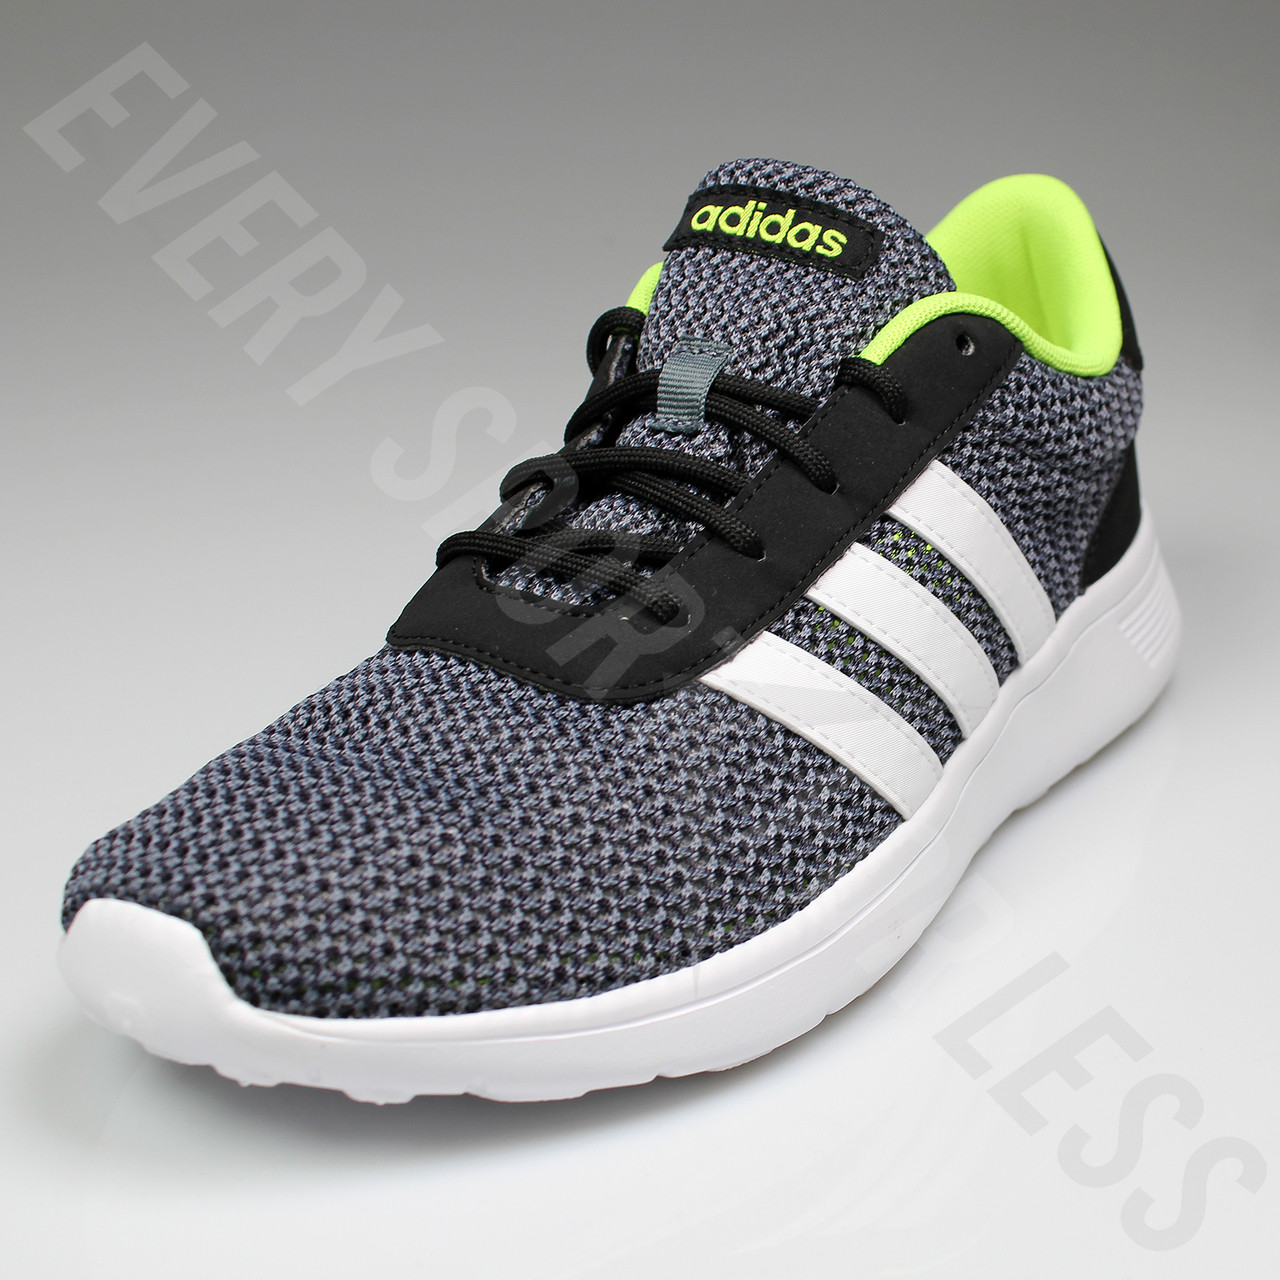 Adidas Neo Lit Racer - Mens - F99417 - Size 8